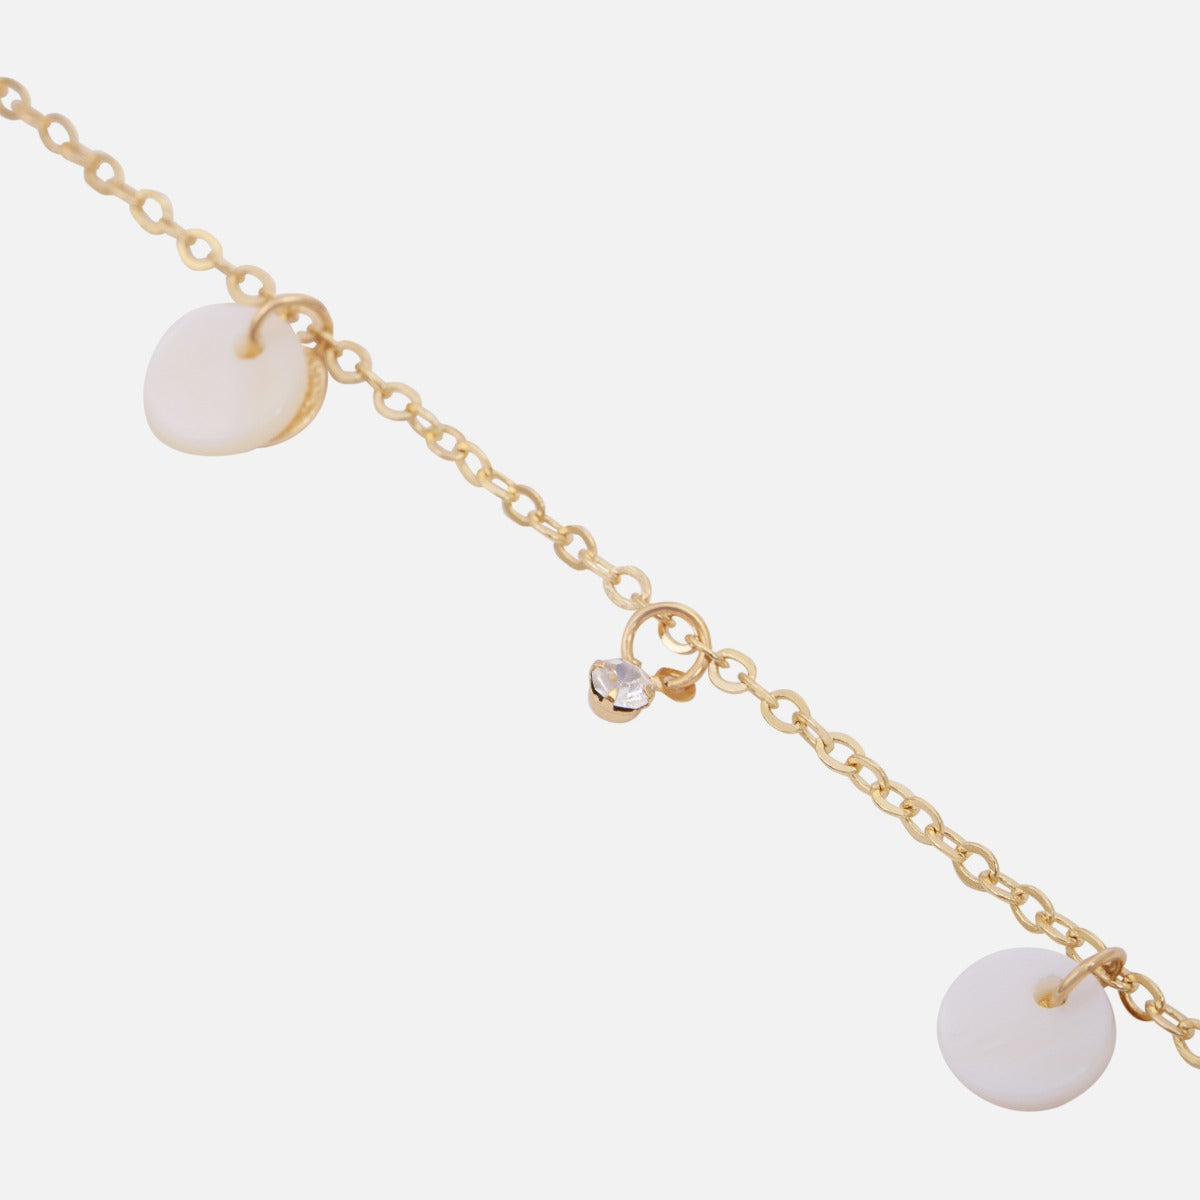 Golden ankle chain with white circle charms